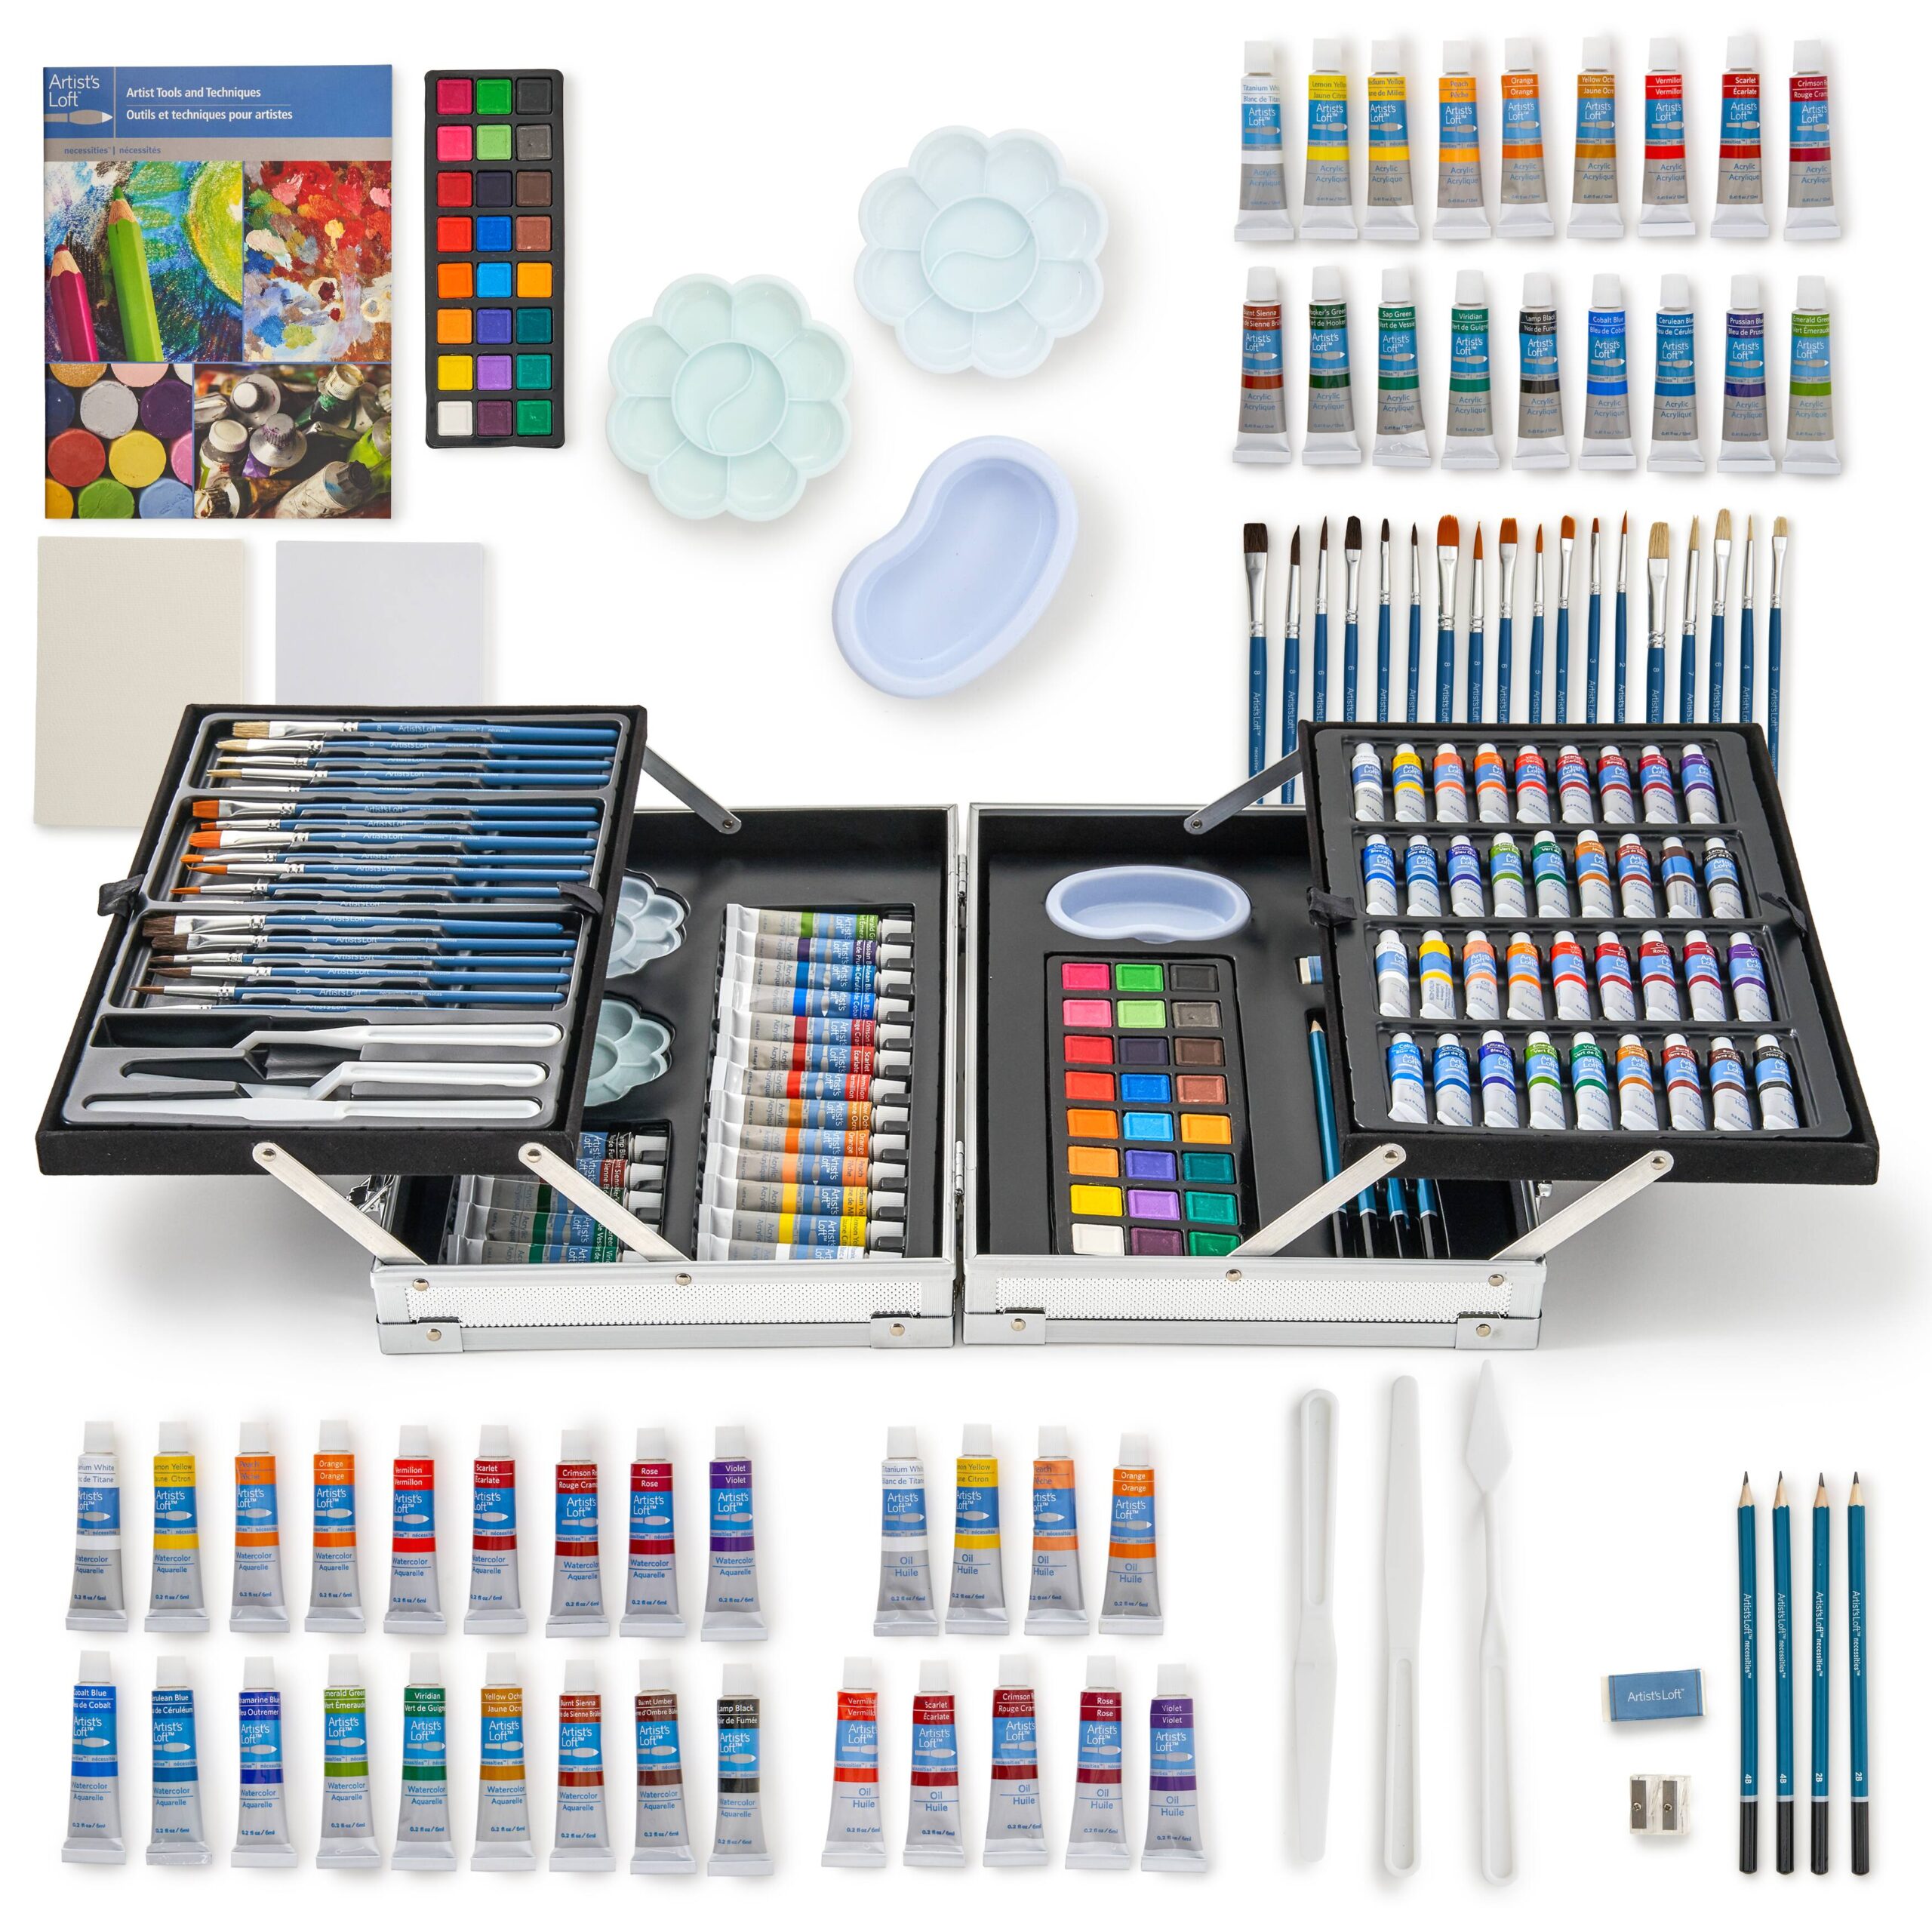 126pc Mixed Media Art Set in Carrying Case - Paint Sets - Art Supplies & Painting